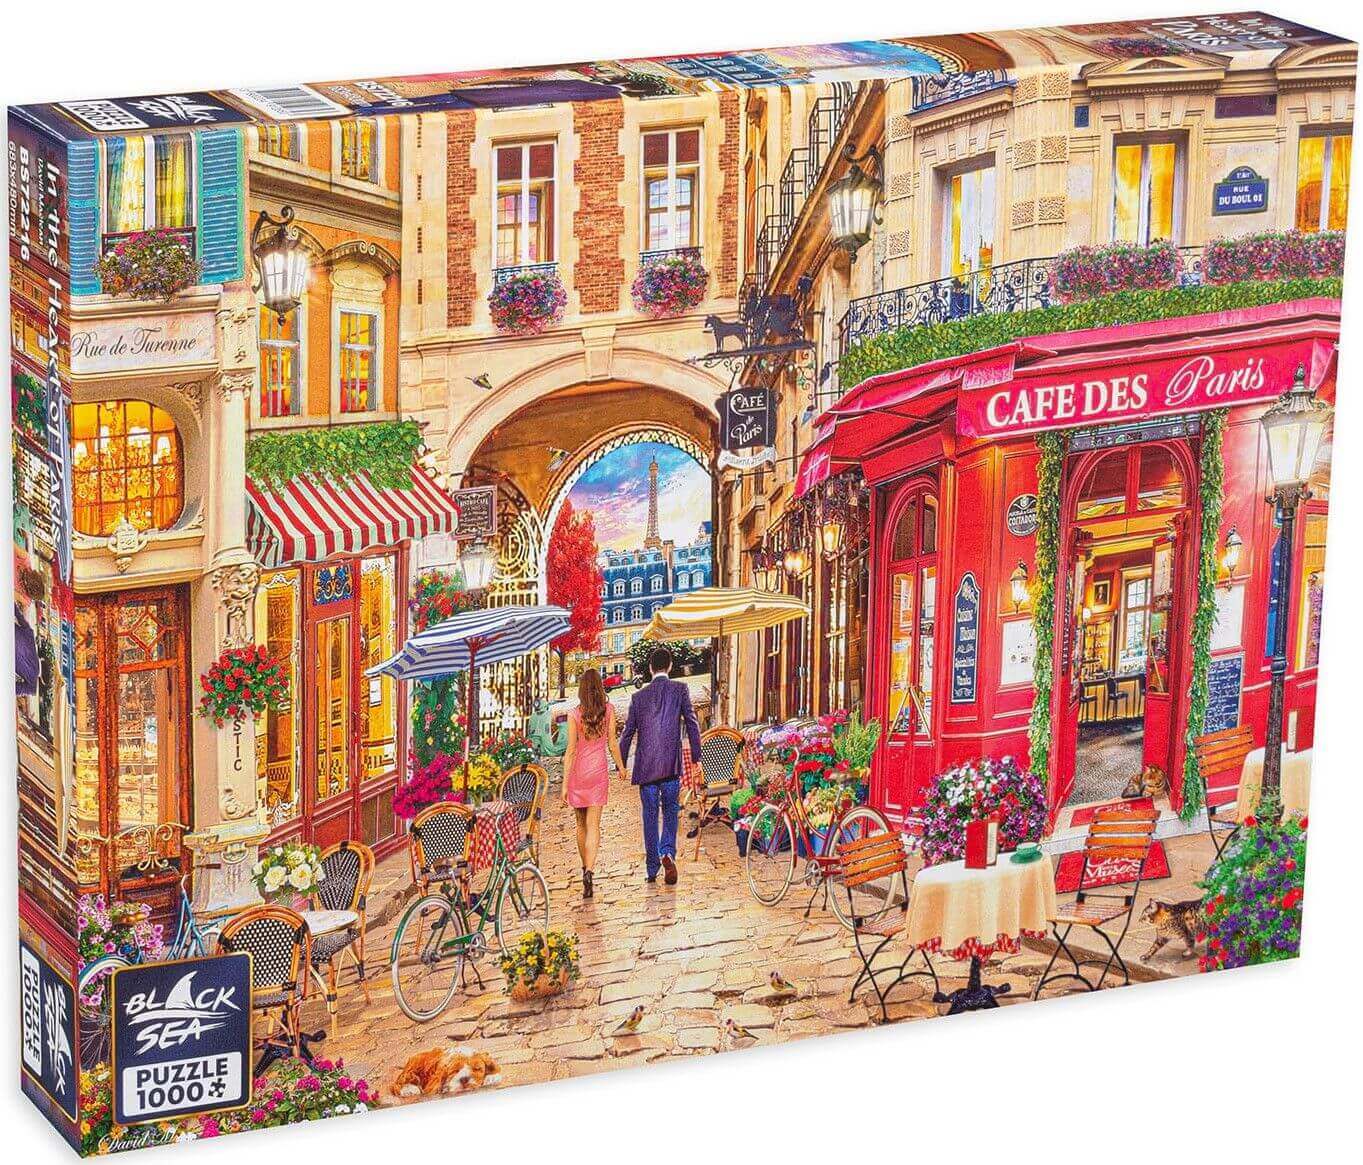 Puzzle Black Sea Premium 1000 pieces - In the Heart of Paris, The heart of Paris is beating to the chanson’s rhythm, the fragrance of freshly baked croissants and coffee float in the air, caressing the senses. The mild pigments and impressive knack for de